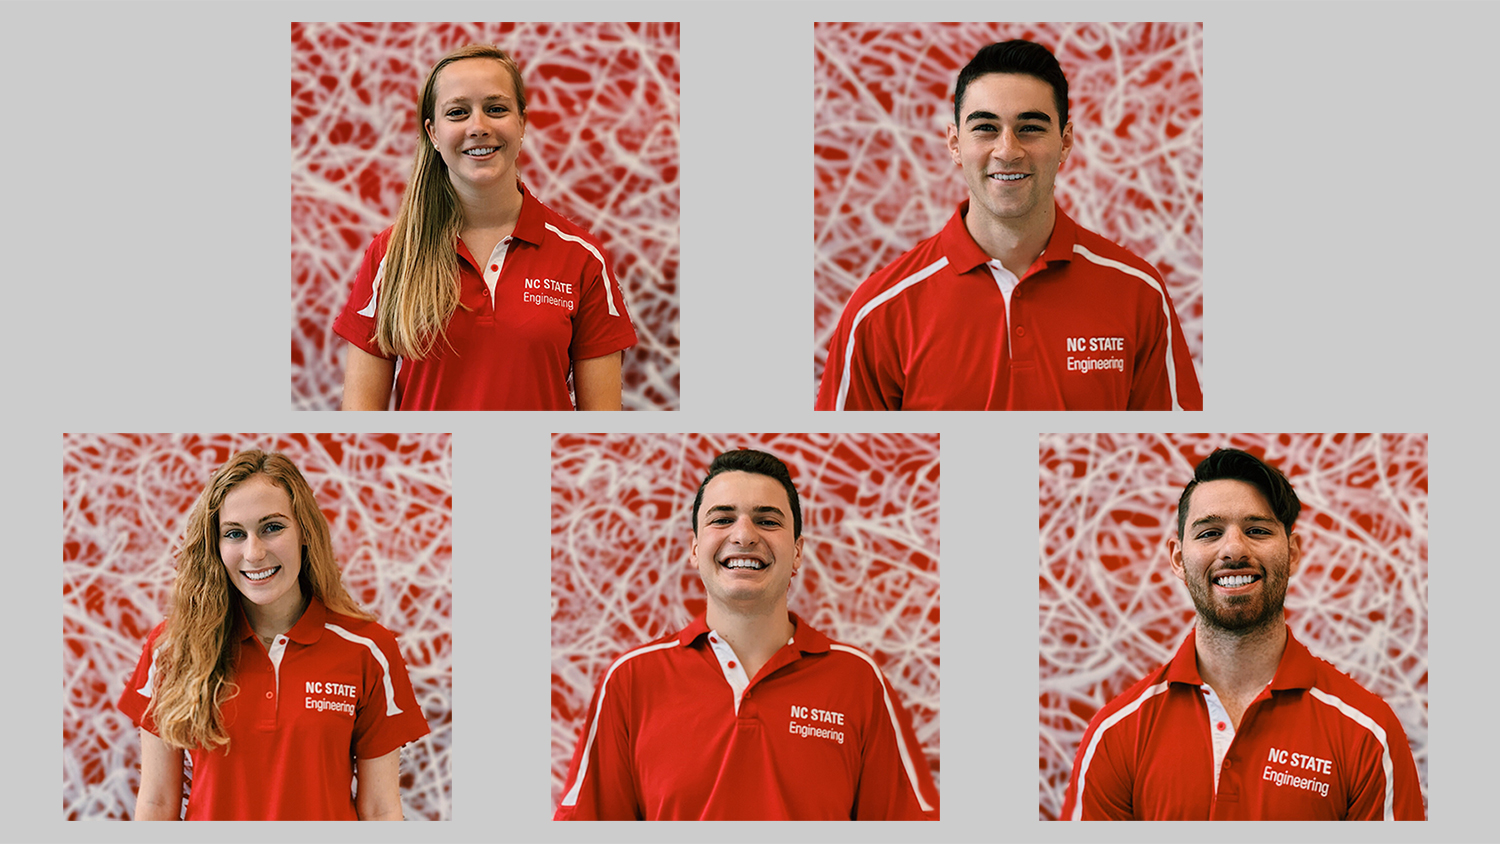 The five team members are (clockwise): Silvana Alfieri, a senior double-majoring in environmental engineering and environmental policy; Kevin Duke, a junior majoring in civil engineering; Rachel Figard, a junior majoring in industrial and systems engineering; Grant Jordan, a senior majoring in industrial and systems engineering; and Pippin Payne, a senior double-majoring in mechanical engineering and religious studies.